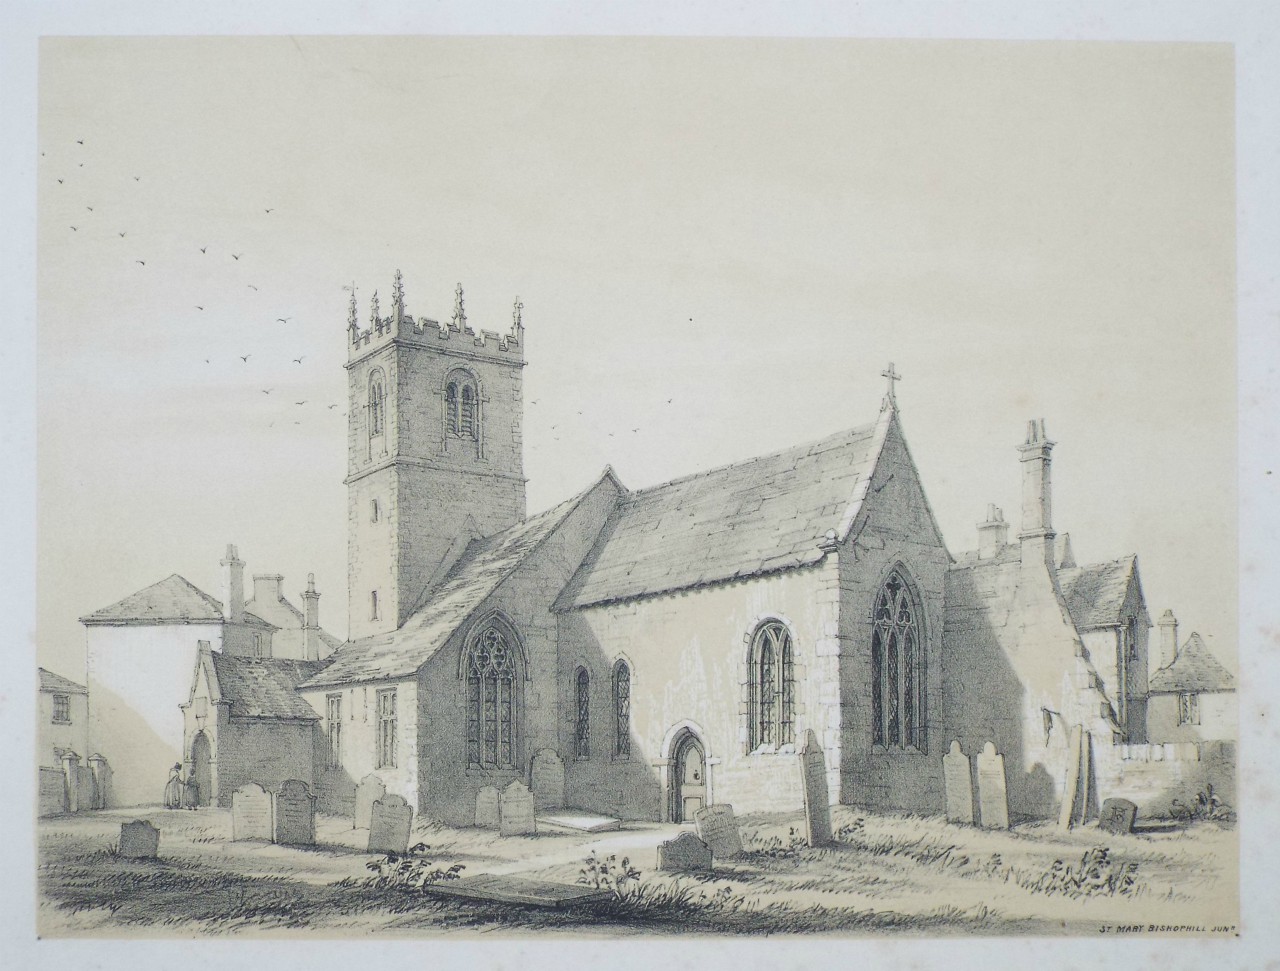 Lithograph - St. Mary Bishophill Jnr. - Monkhouse